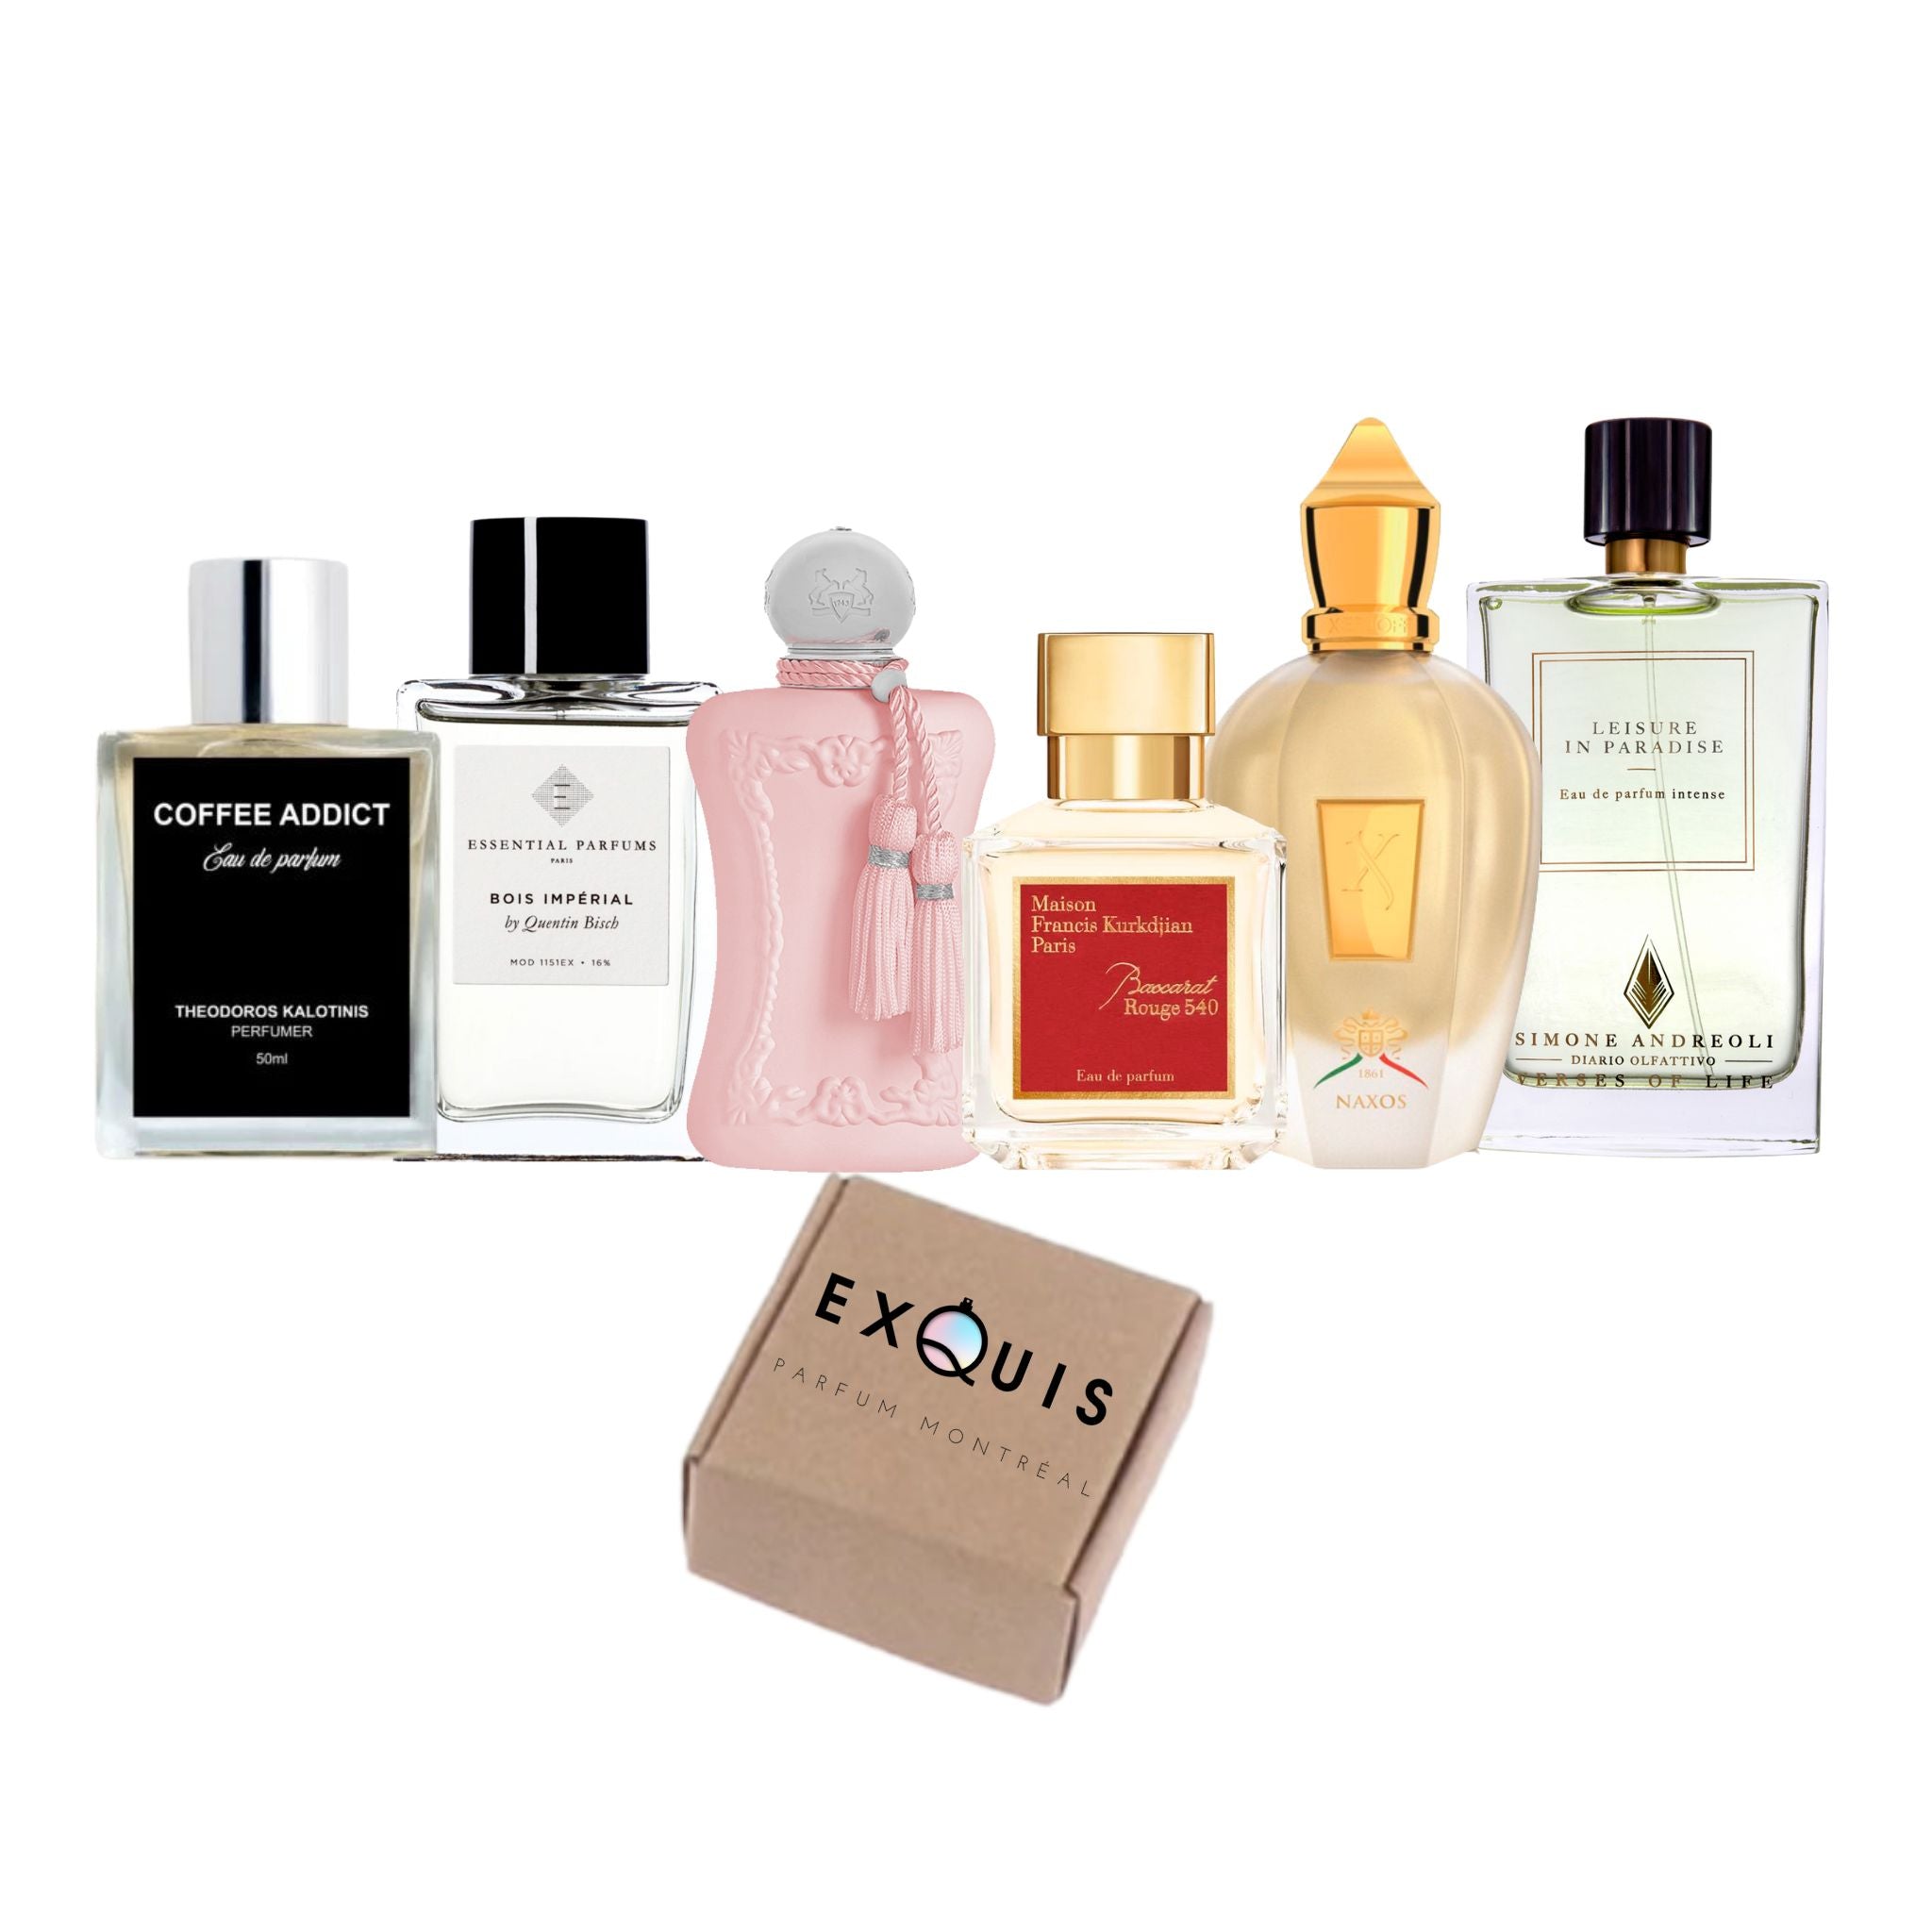 Top 6 best selling fragrances discovery sample set